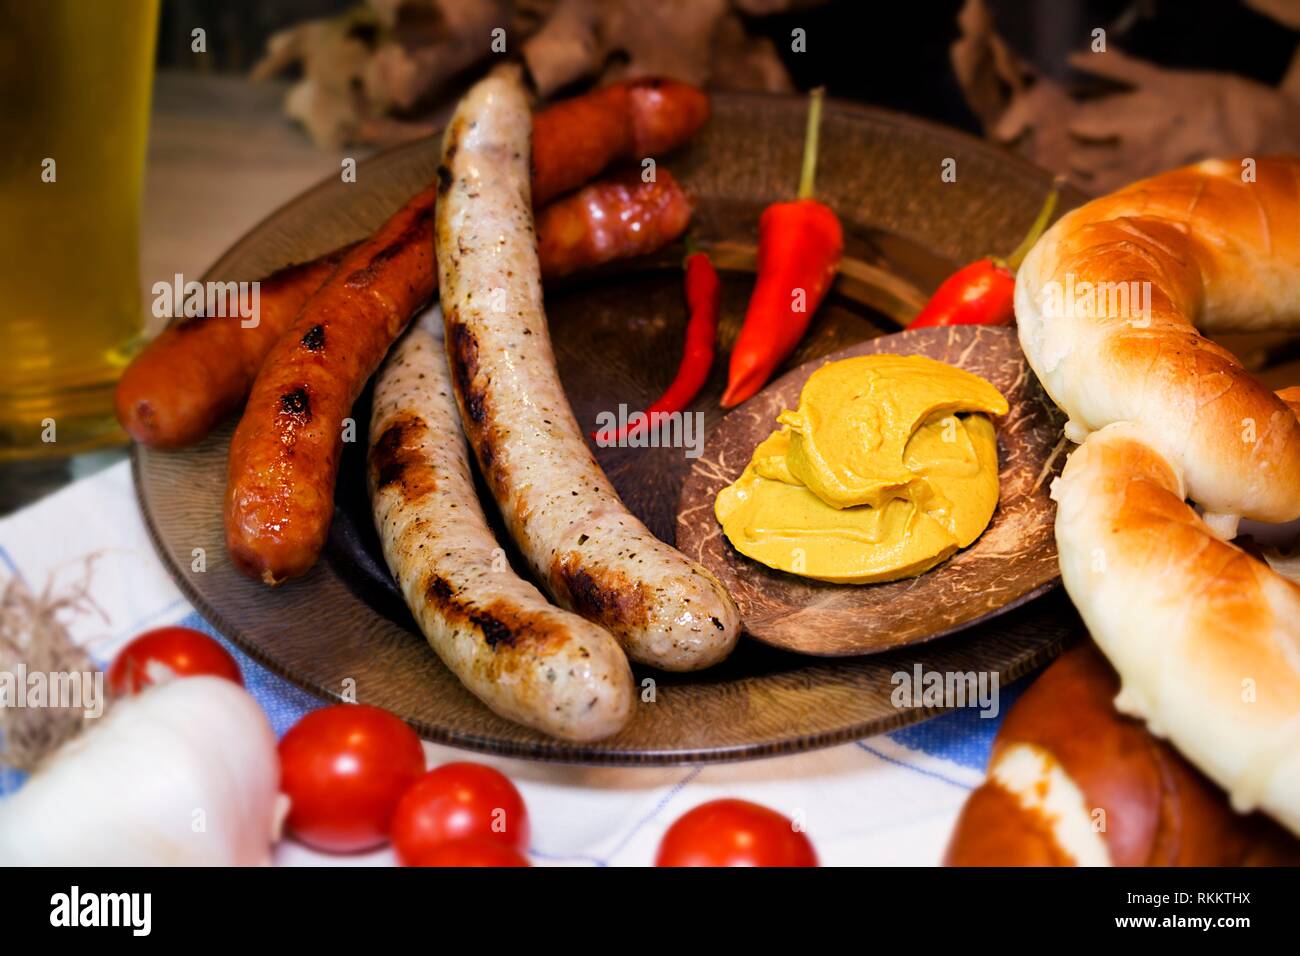 Bavarian White And Red Sausages With Mustard, Bavarian Buns and Pretzels At The Table. October Fest Concept. Stock Photo